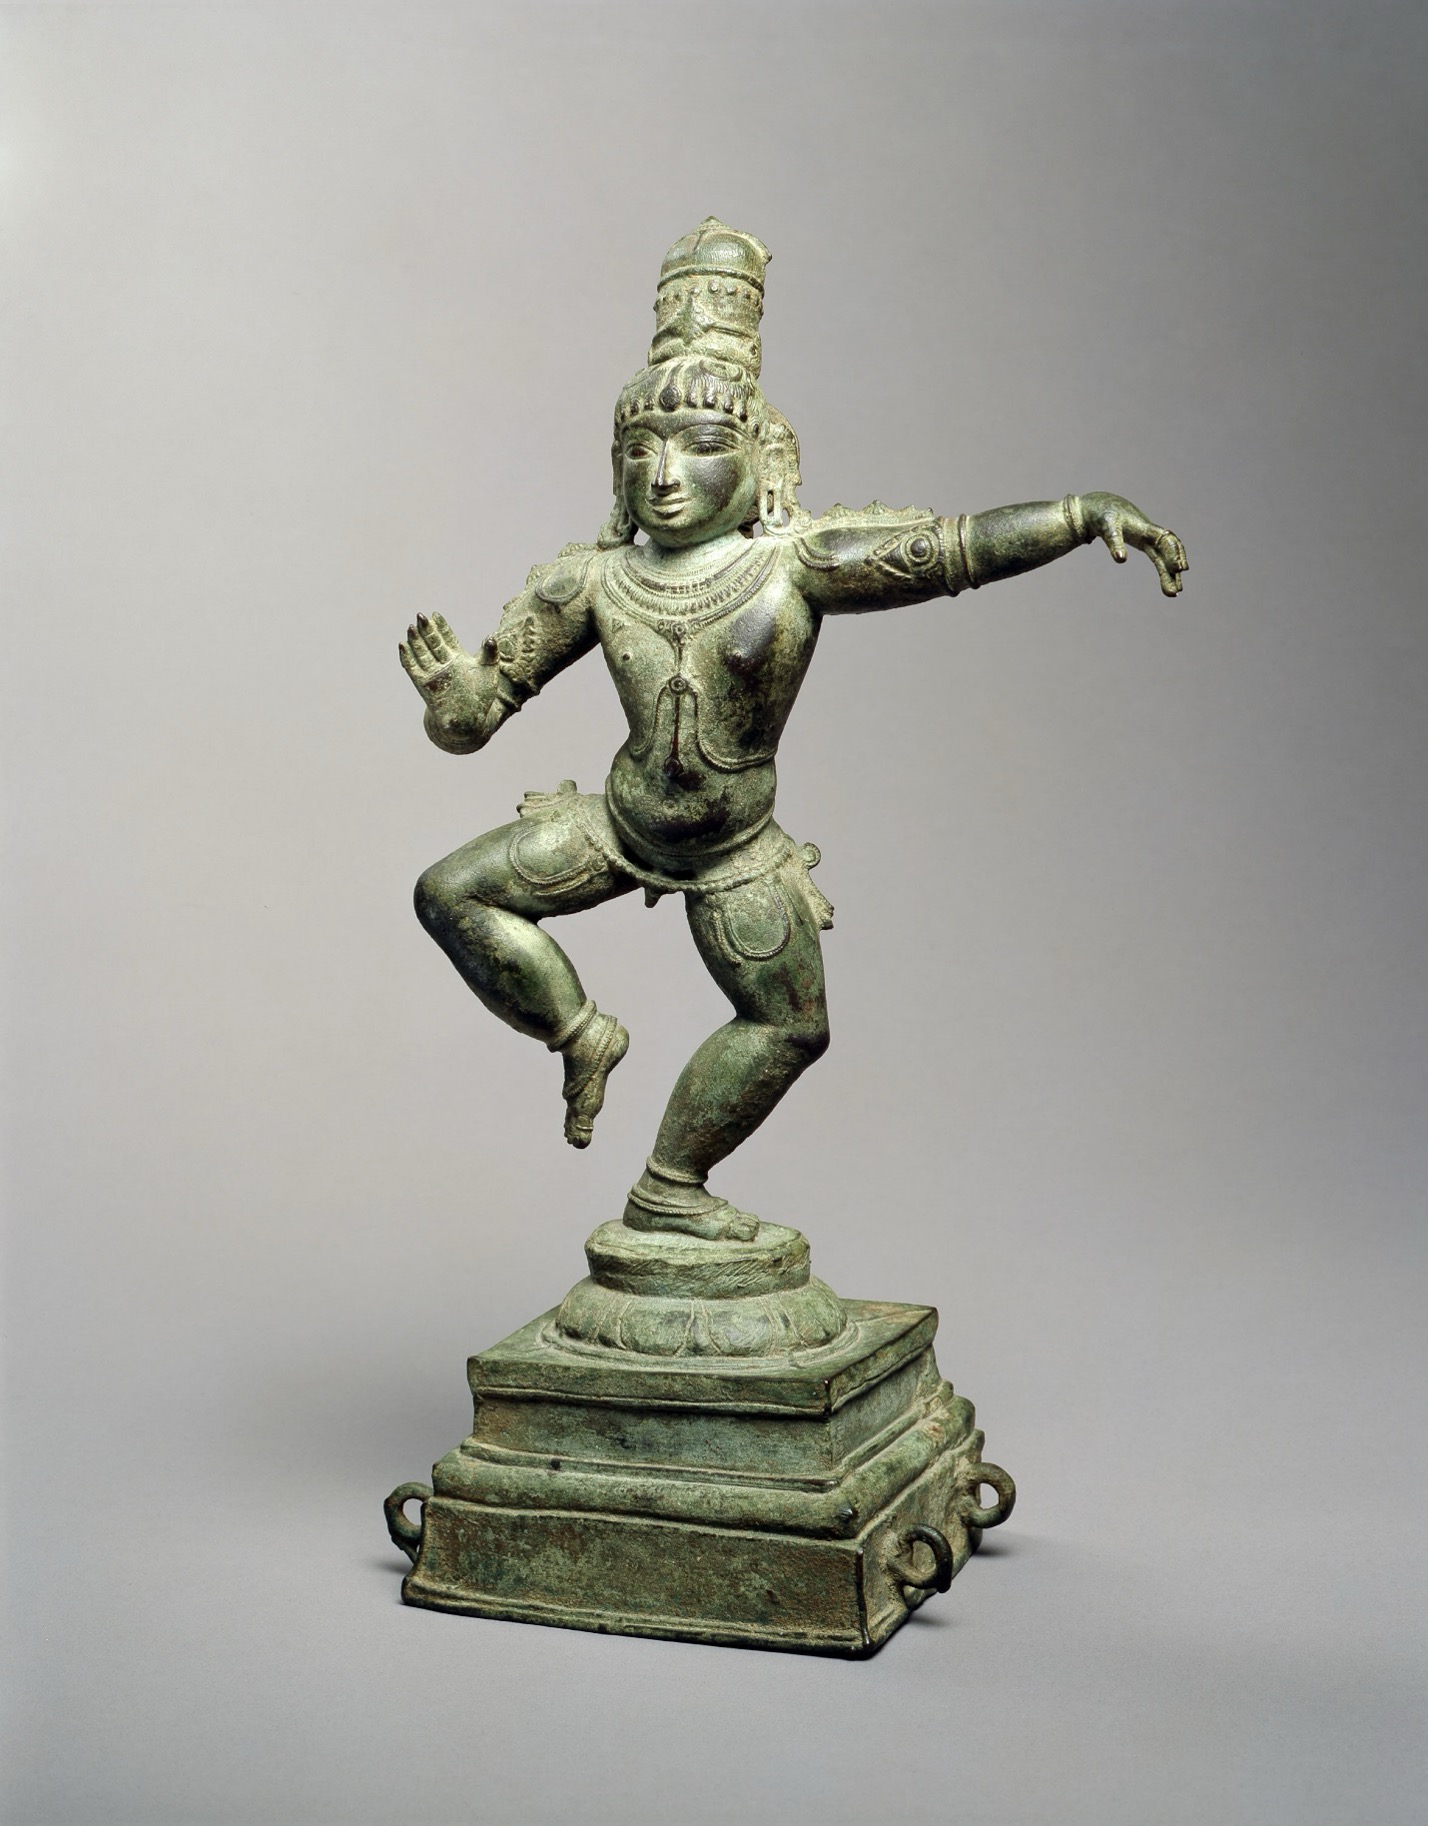 Dancing Balakrishna sculpture shown on a gray background.2001.1.3.